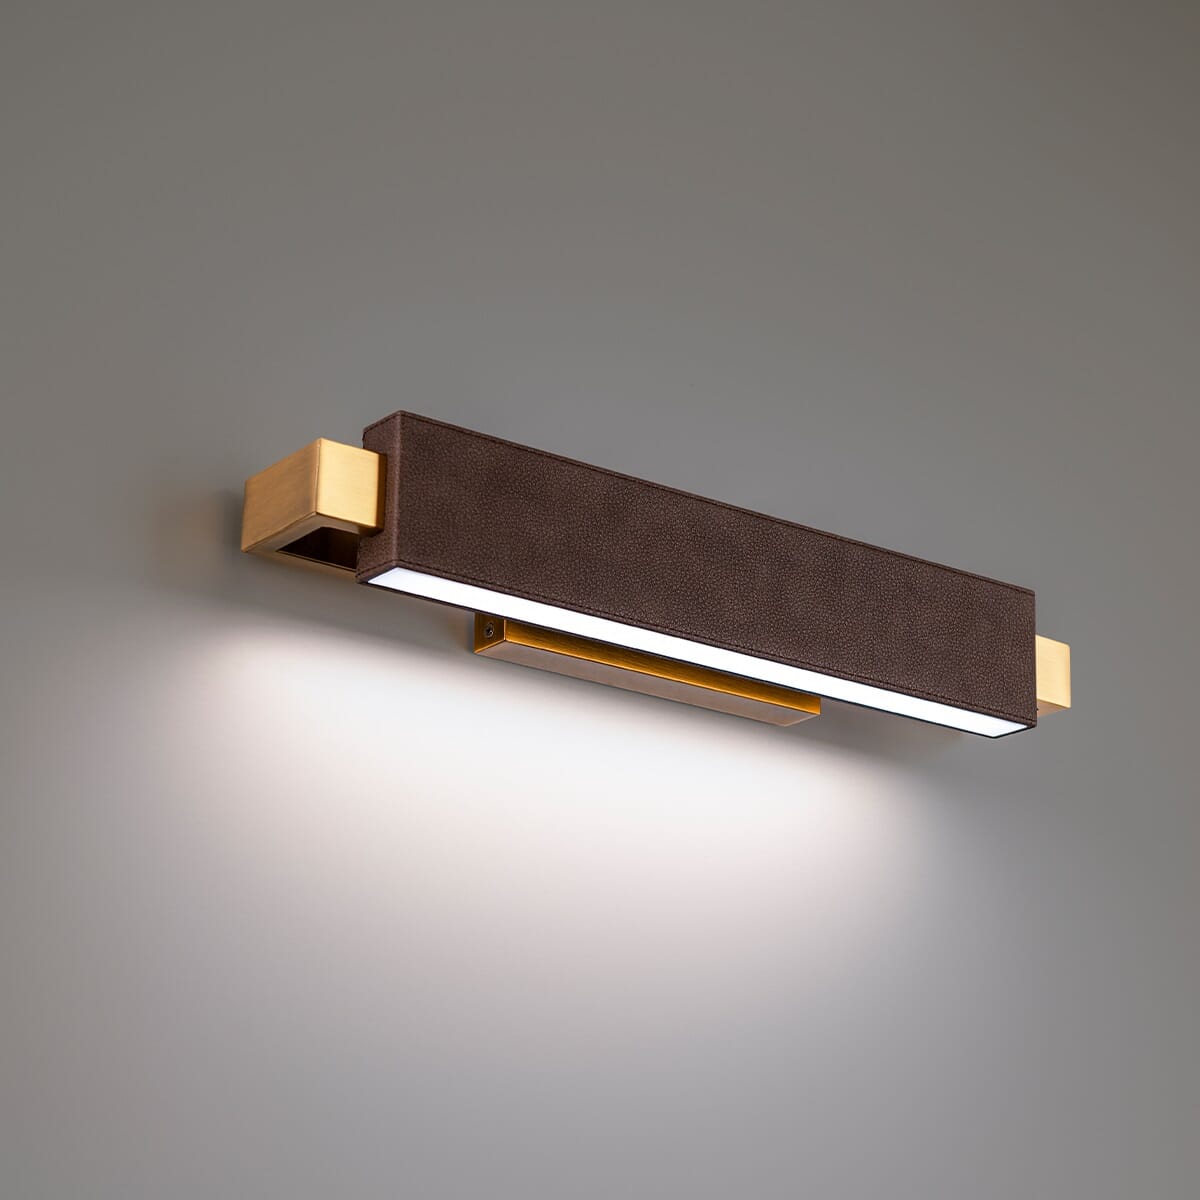 Modern Forms Kinsman Bathroom Vanity Light in Warm Brown and Aged Brass -  WS-28119-BW/AB